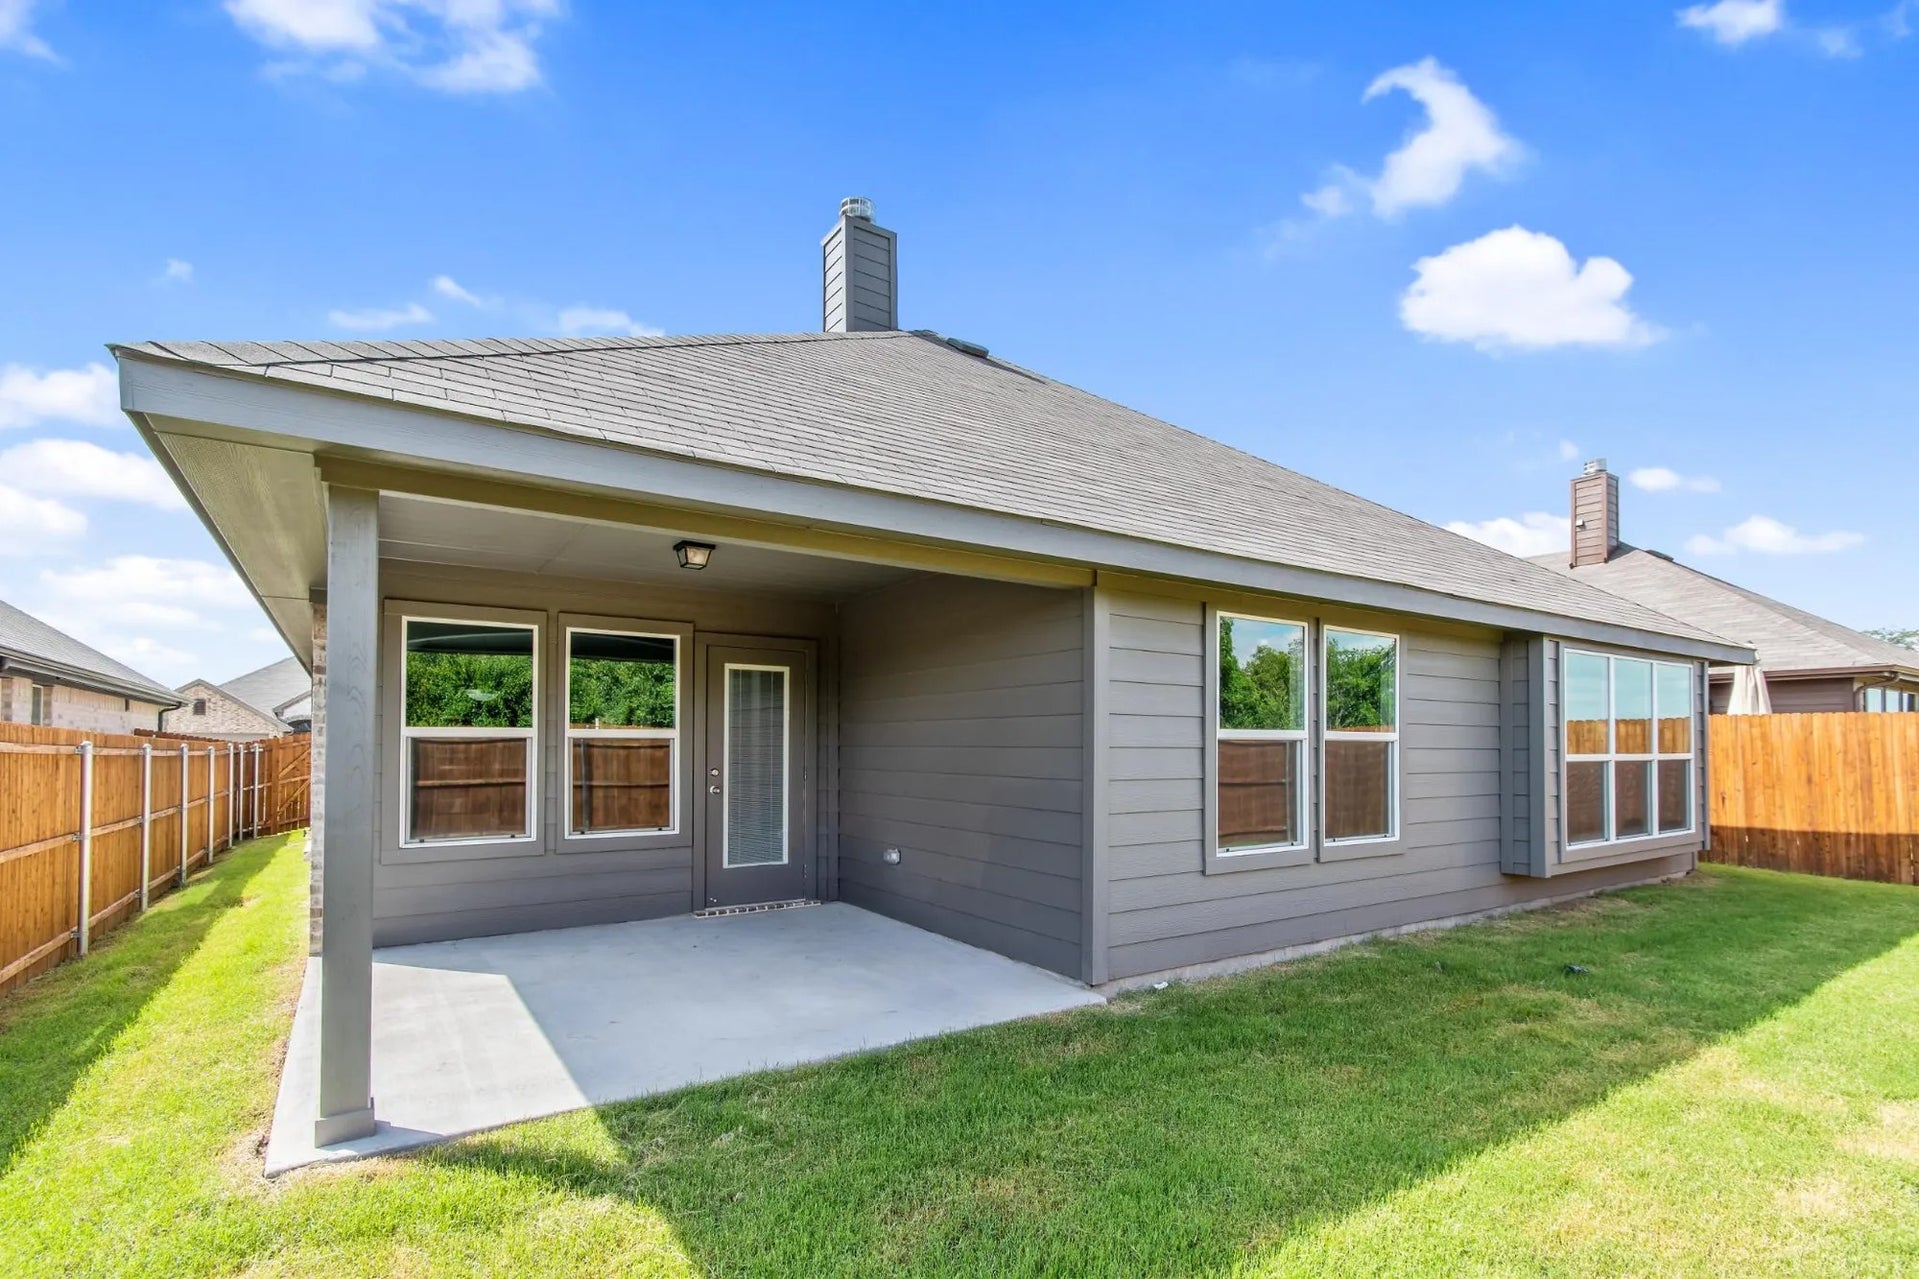 3br New Home in Cleburne, TX